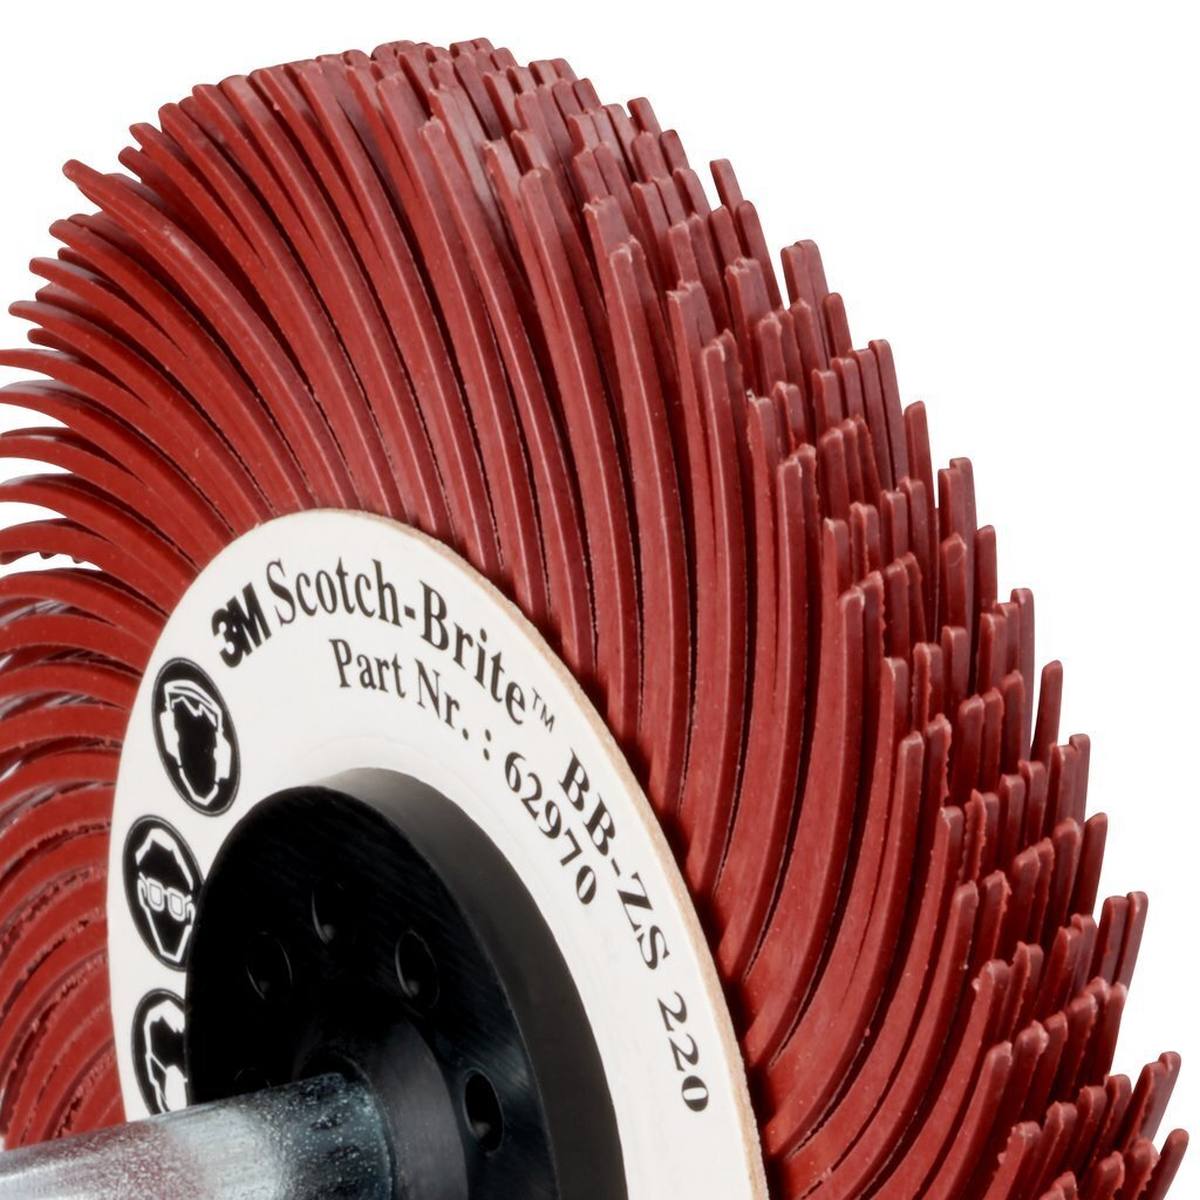 3M Scotch-Brite Radial Bristle Disc BB-ZS with shaft, brown, 76.2 mm, P220, type C #62970